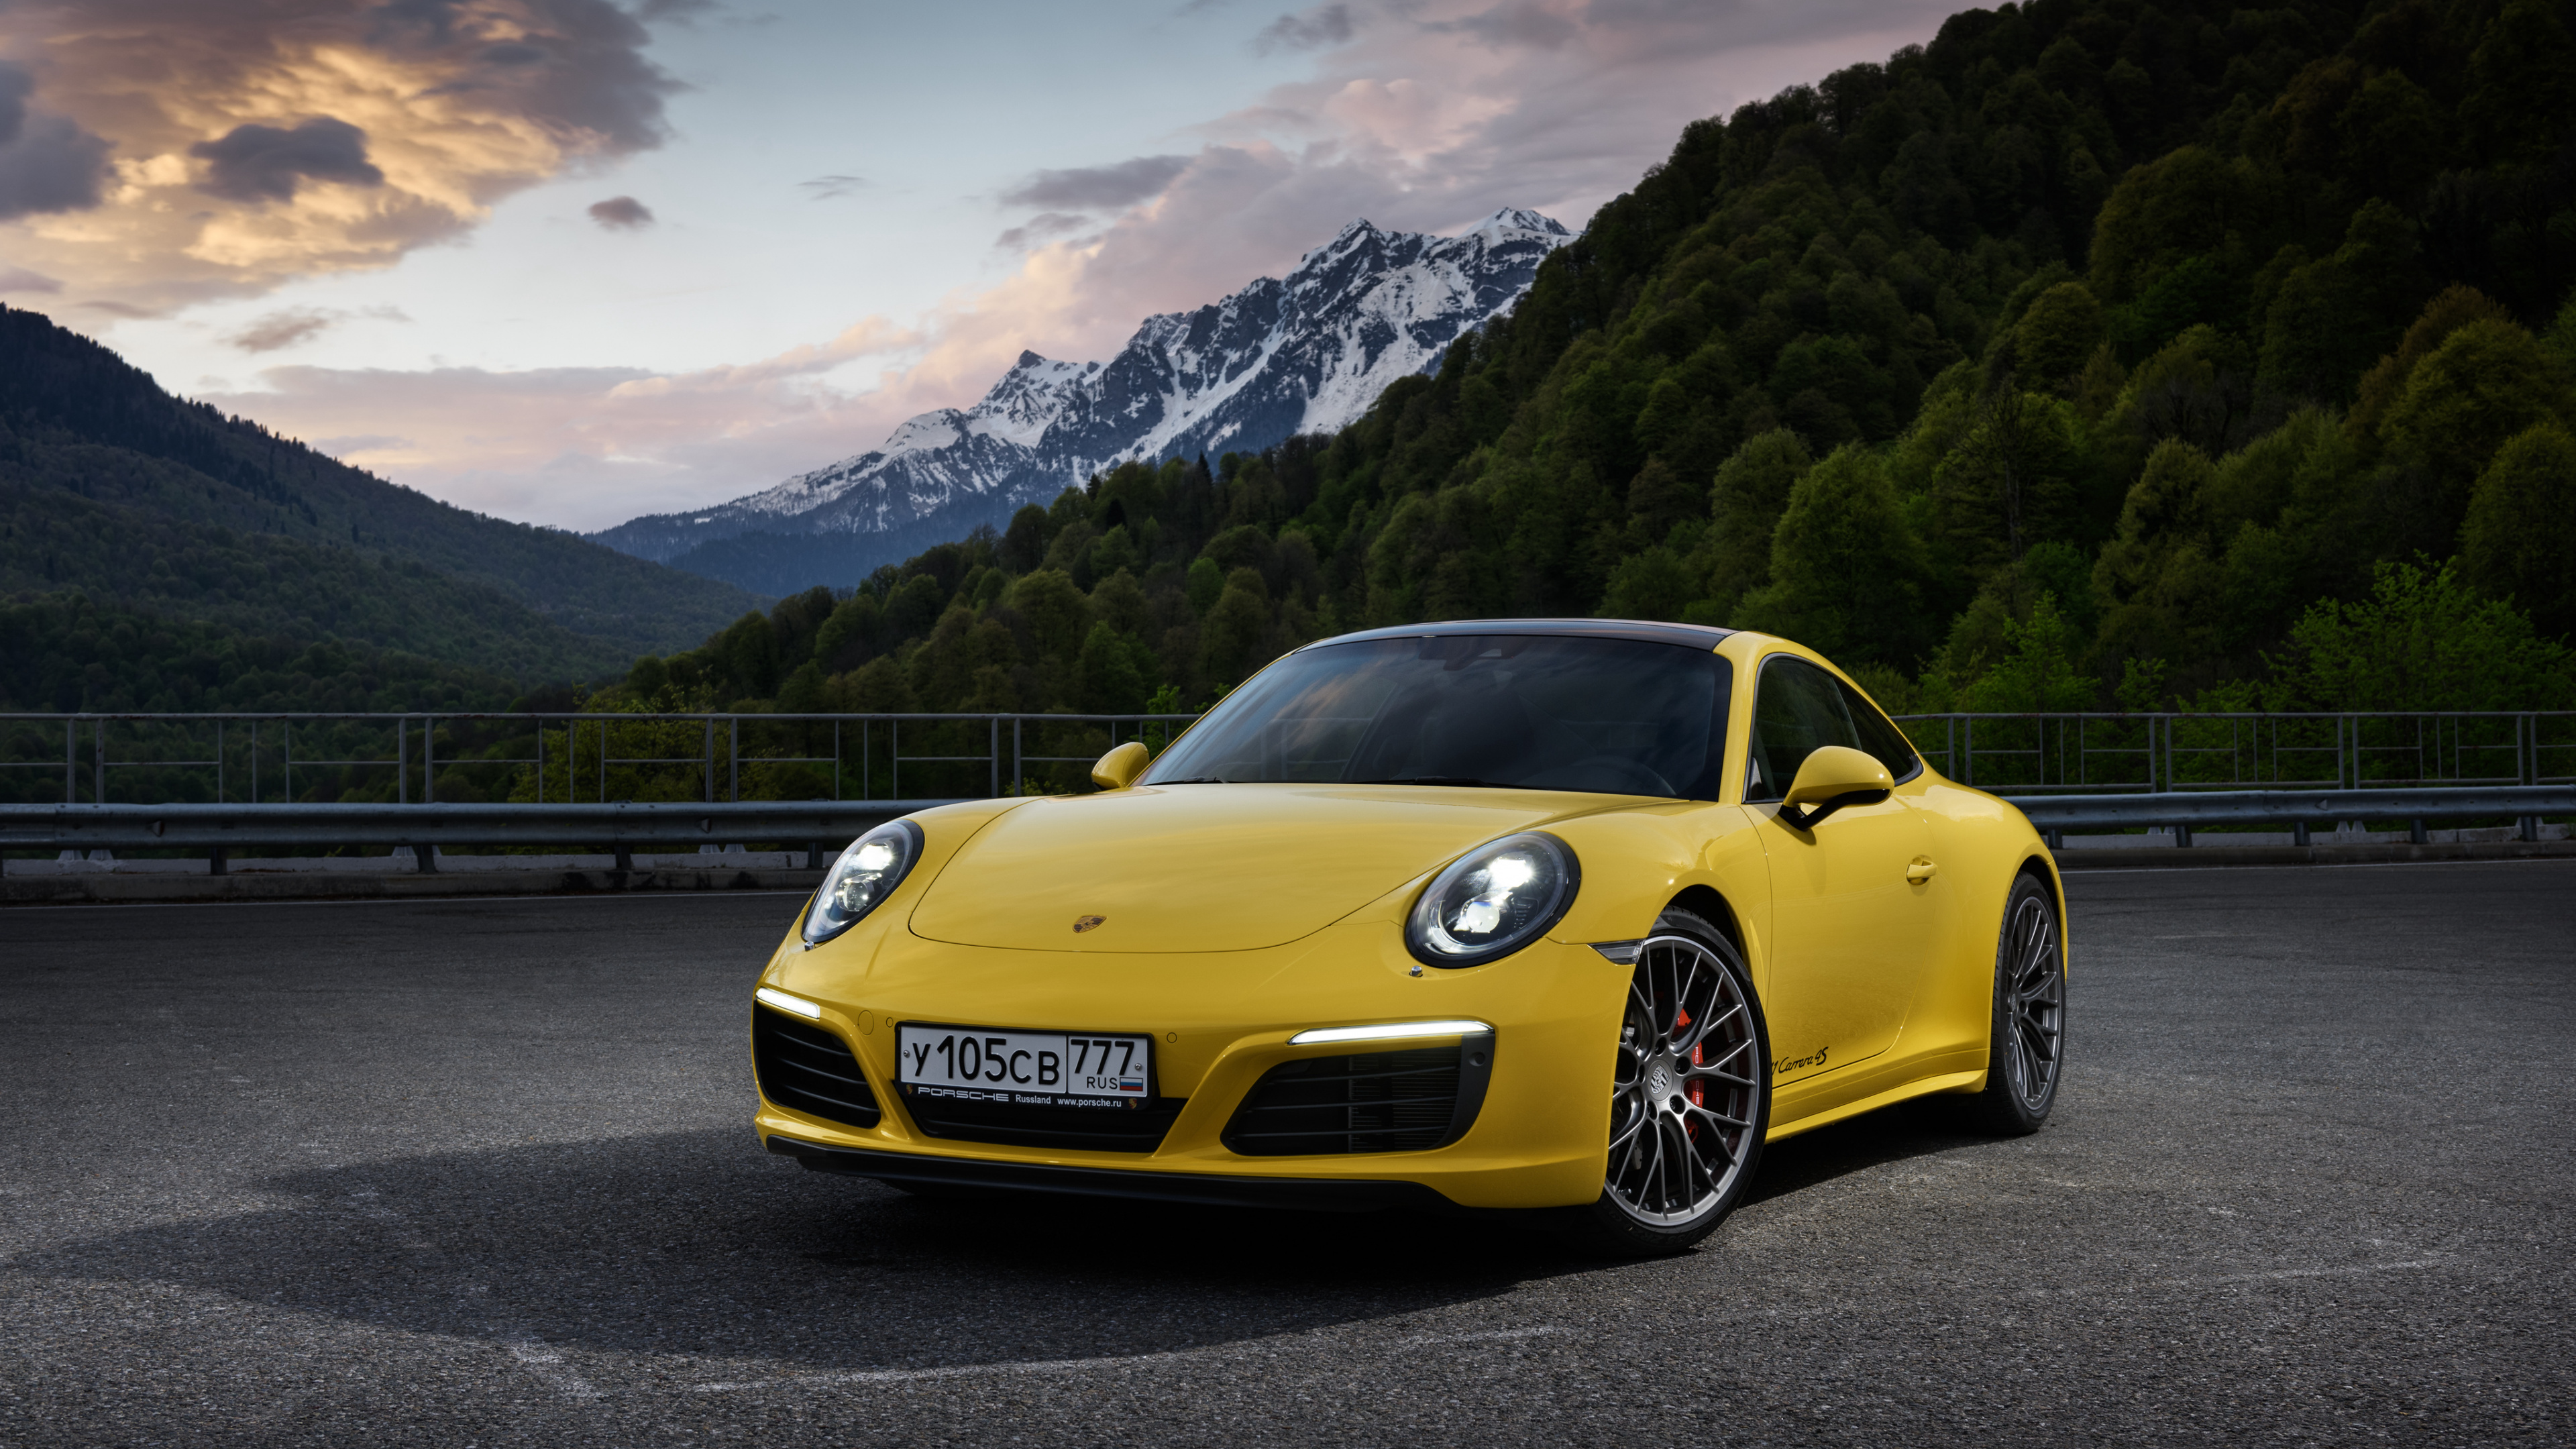 Yellow Porsche 911 on Road Near Mountain During Daytime. Wallpaper in 3840x2160 Resolution